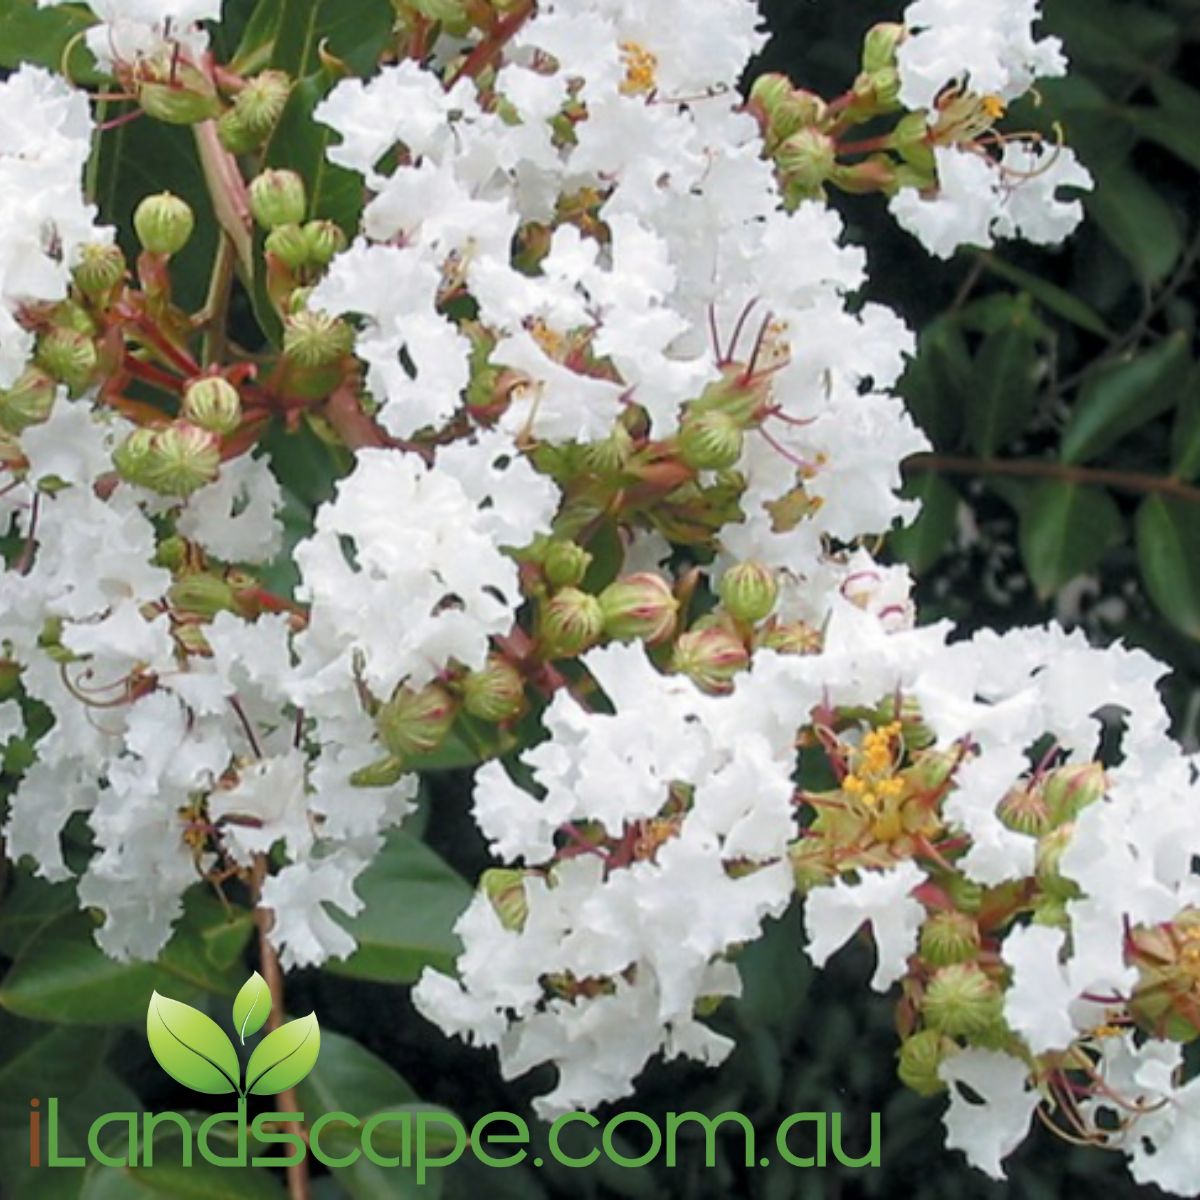 Lagerstroemia - Crepe Myrtle Natchez is a hardy crepe myrtle that grows to approx. 7m tall and has an abundance of clustered white flowers during Summer & Autumn.  Crepe Myrtles are deciduous and will drop their leaves during Winter before returning with a flush of beautiful leaves in Springs 